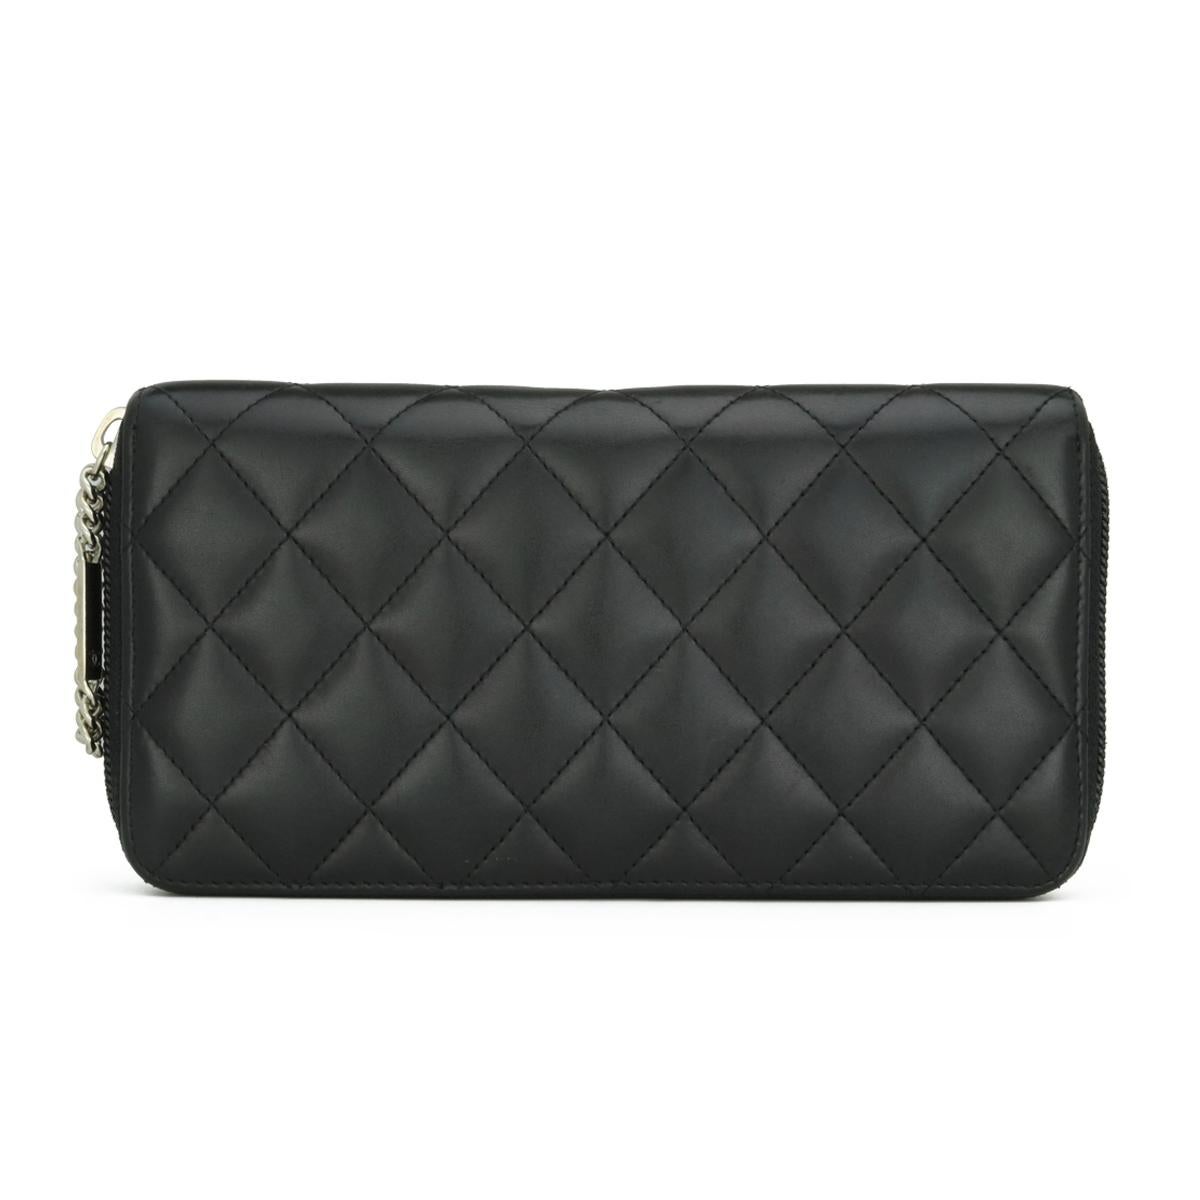 Chanel Quilted Cambon Long Zip Wallet Black Calfskin with Silver Hardware 2012 In Good Condition For Sale In Huddersfield, GB